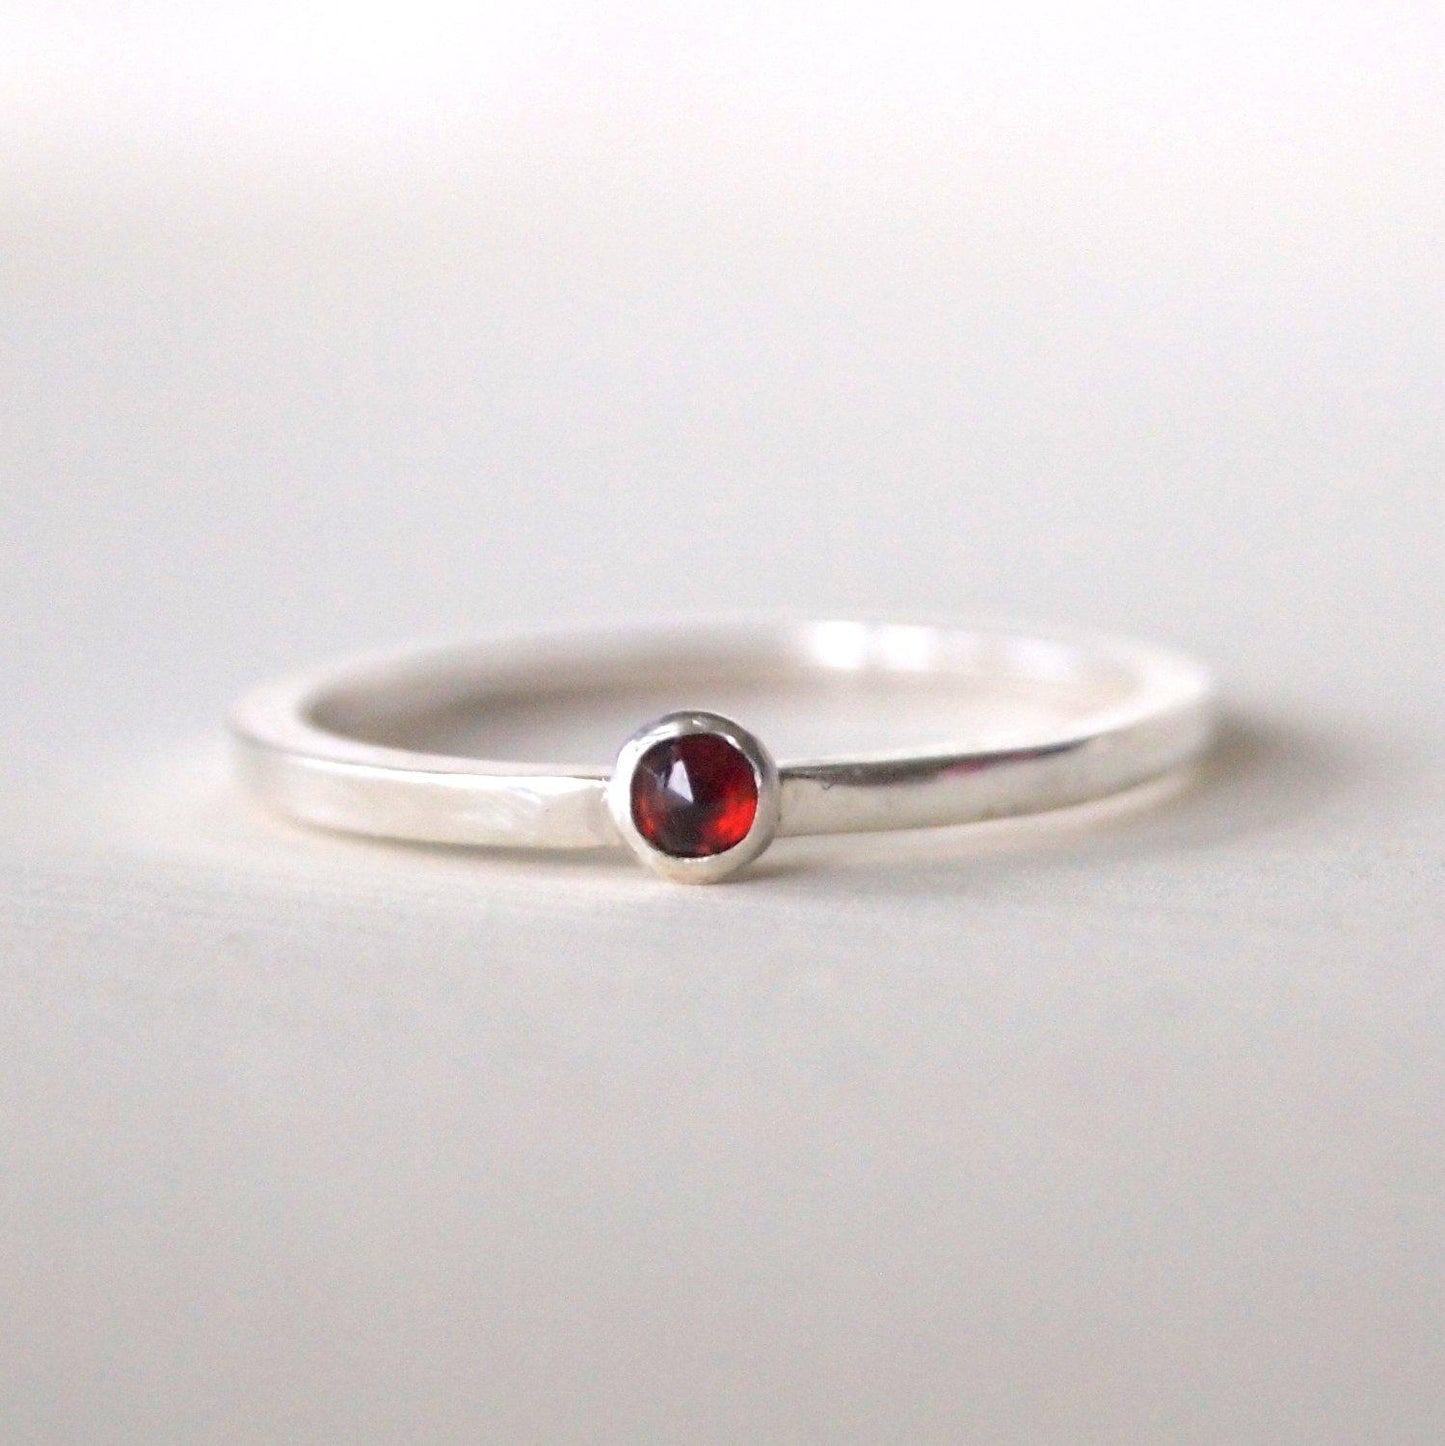 Garnet and Sterling Silver Birthstone Ring for January. The ring is simple in style on a plain square band with a small round facet dark red garnet in the centre. The ring is handmade to your size by maram jewellery in Scotland